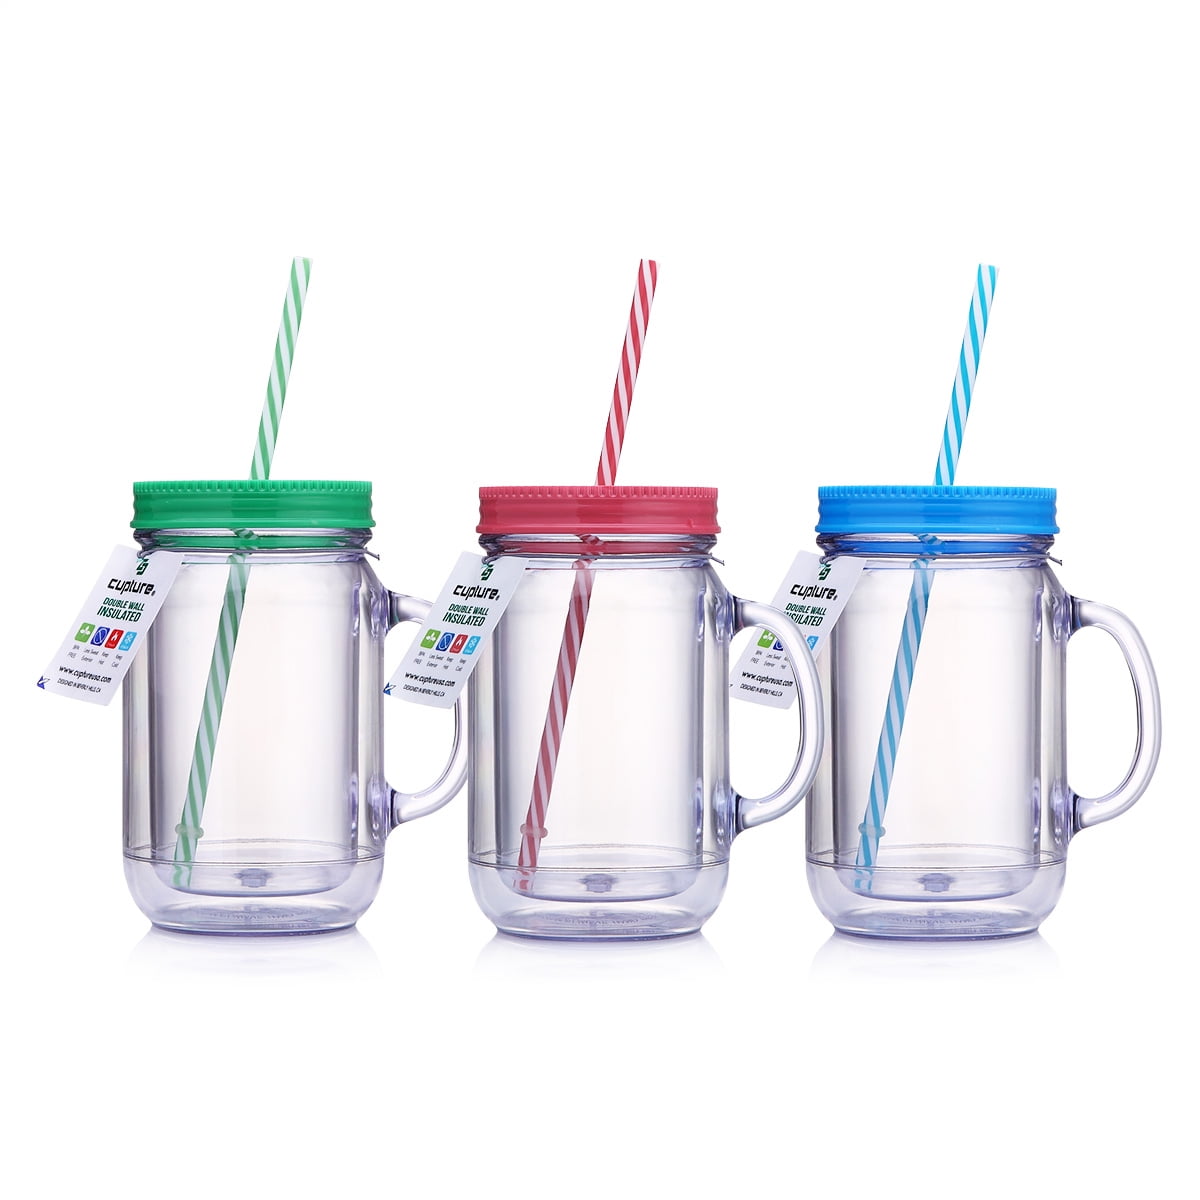 NEW 4 pack of Multi colour glass jar cups with straws and lids drink bbq 500ml 